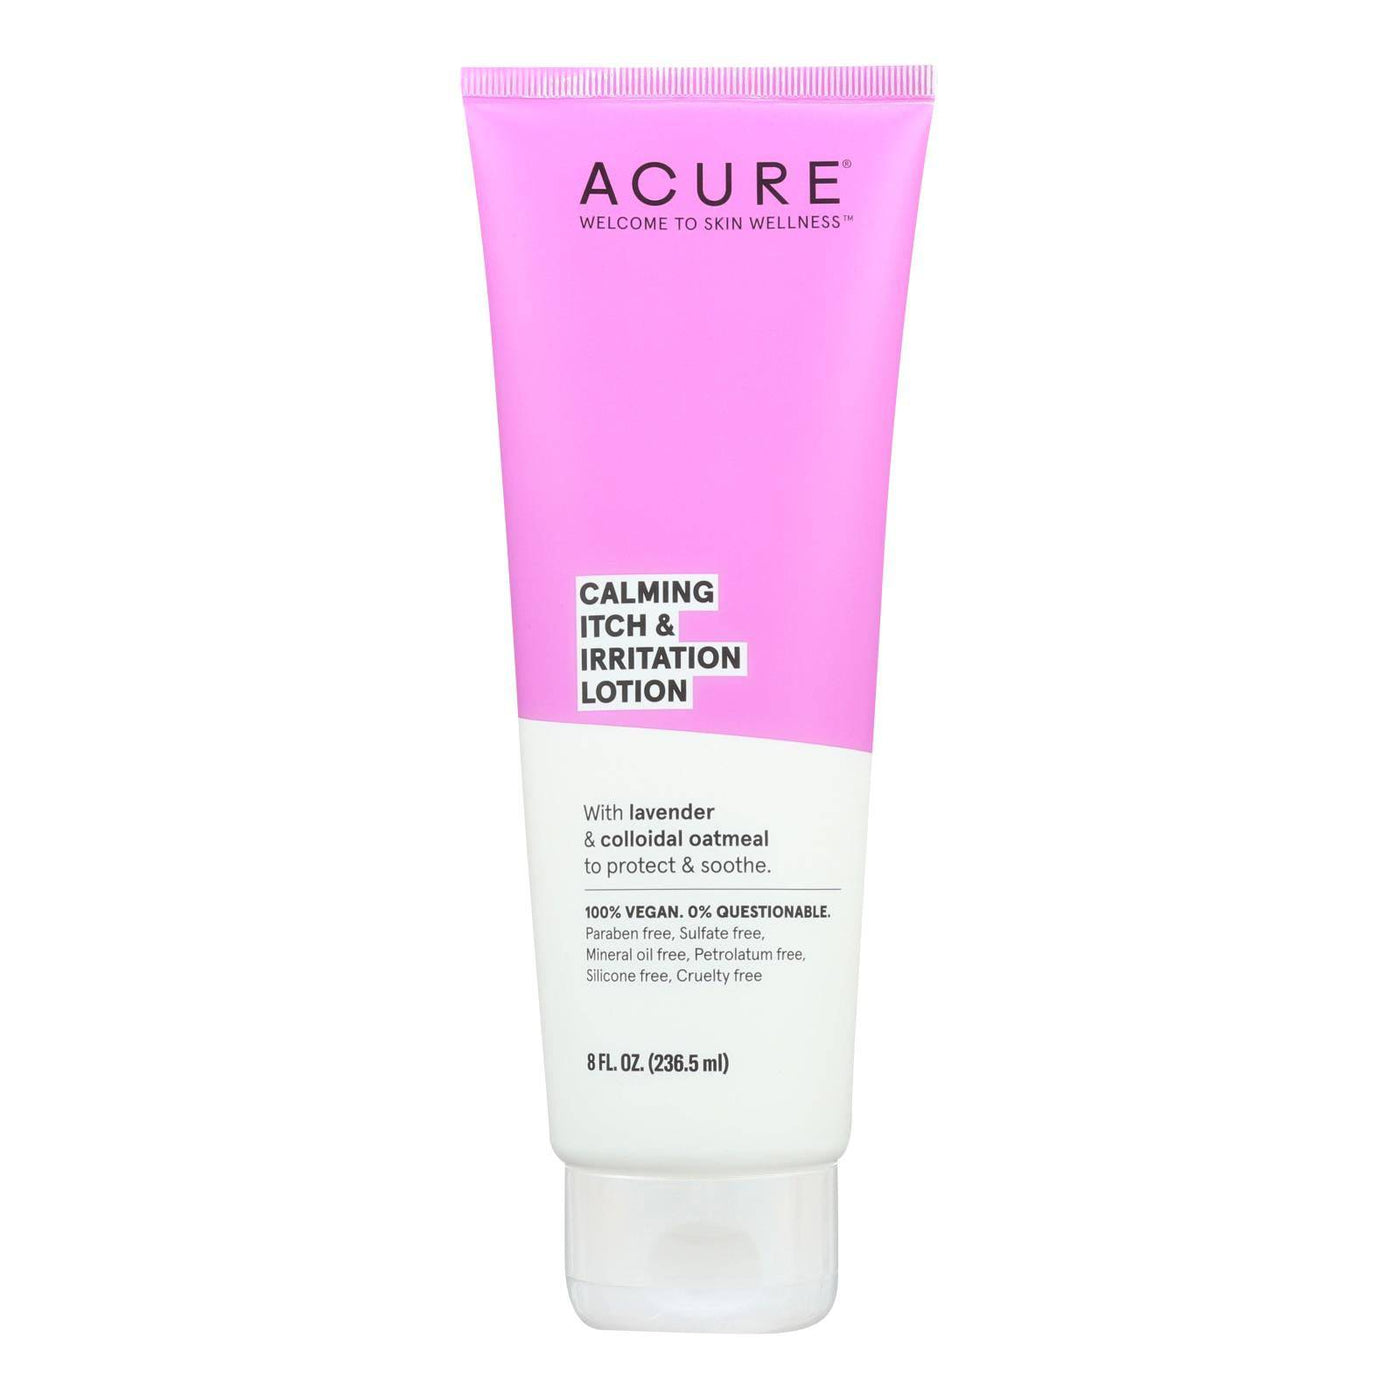 Acure - Lotion - Calming Itch And Irritation Lotion - Lavendar And Oatmeal - 8 Fl Oz. | OnlyNaturals.us